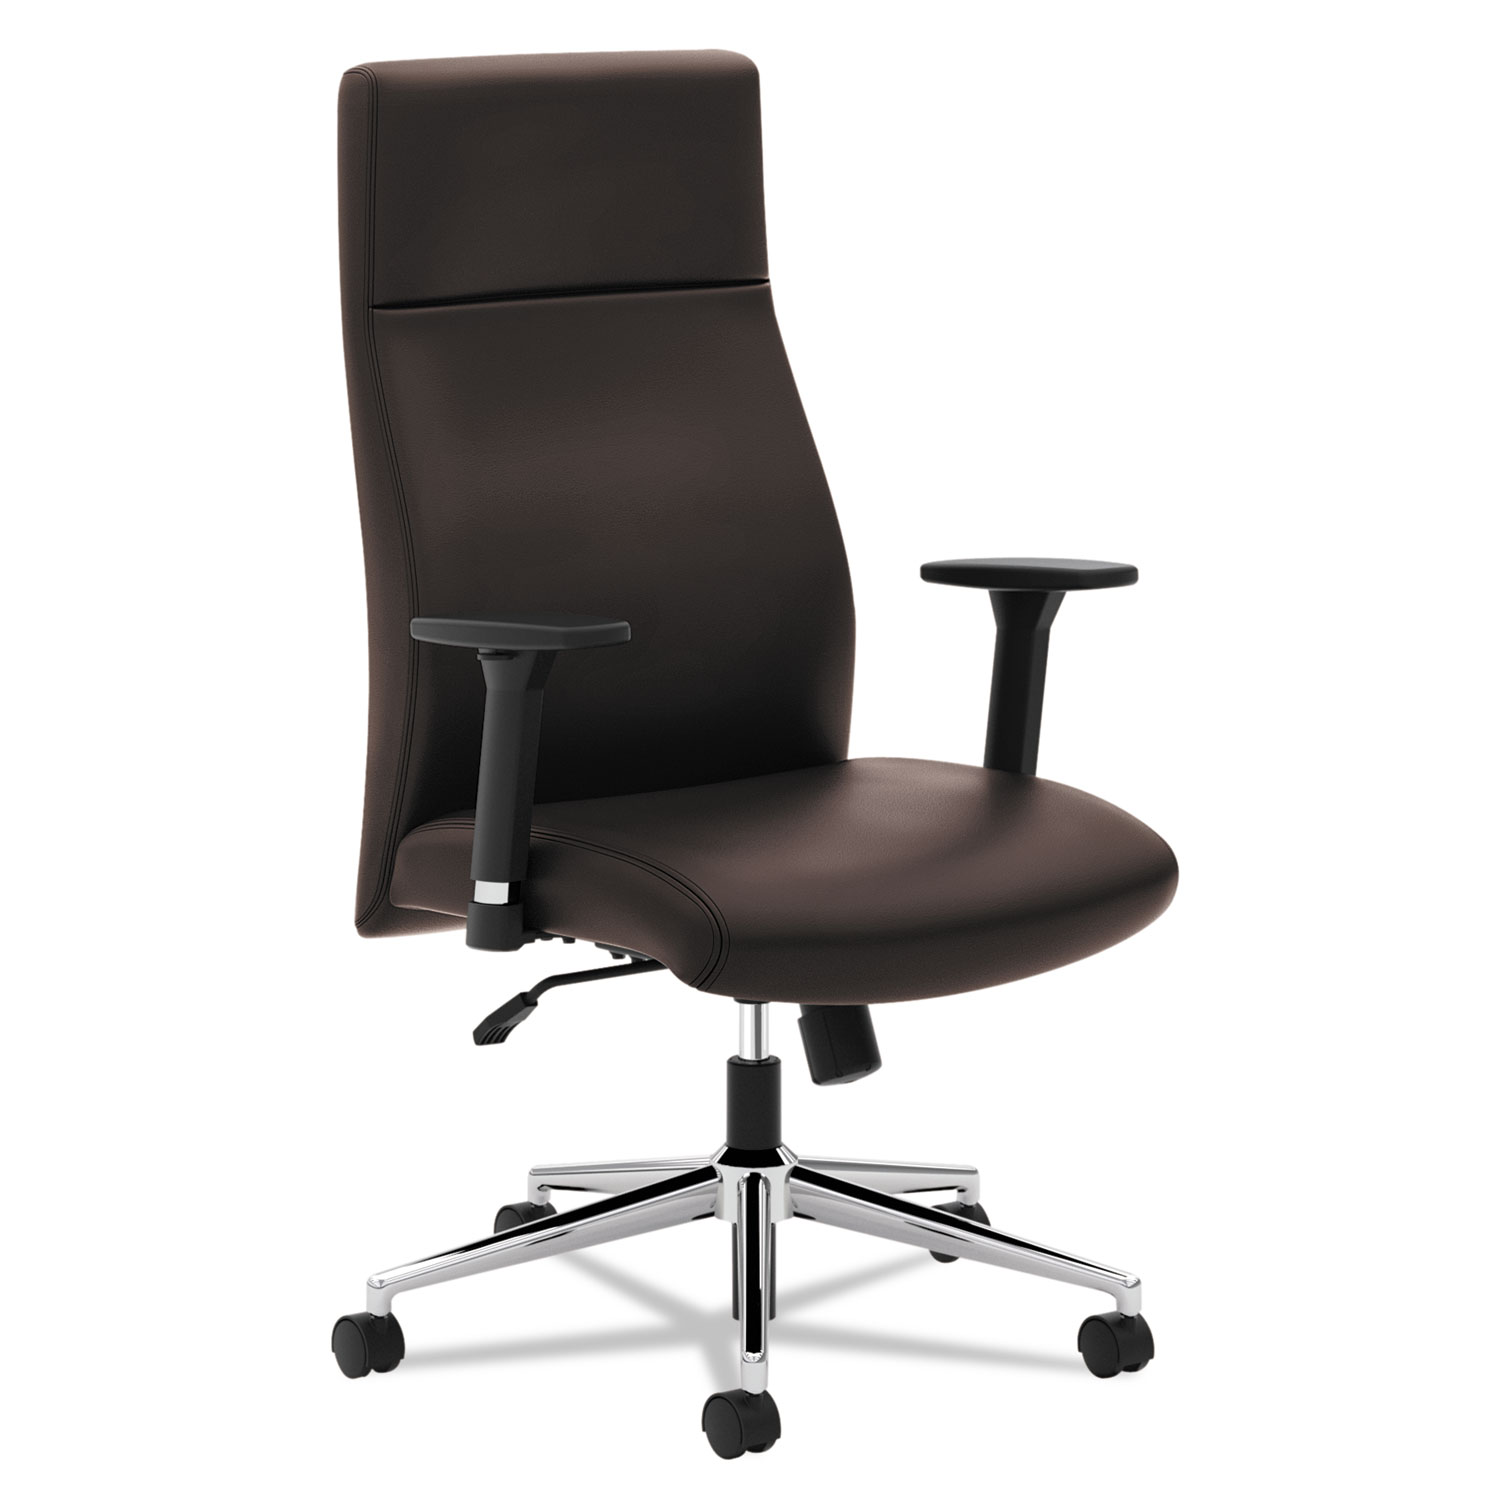 VL108 Executive High-Back Chair, Brown Leather